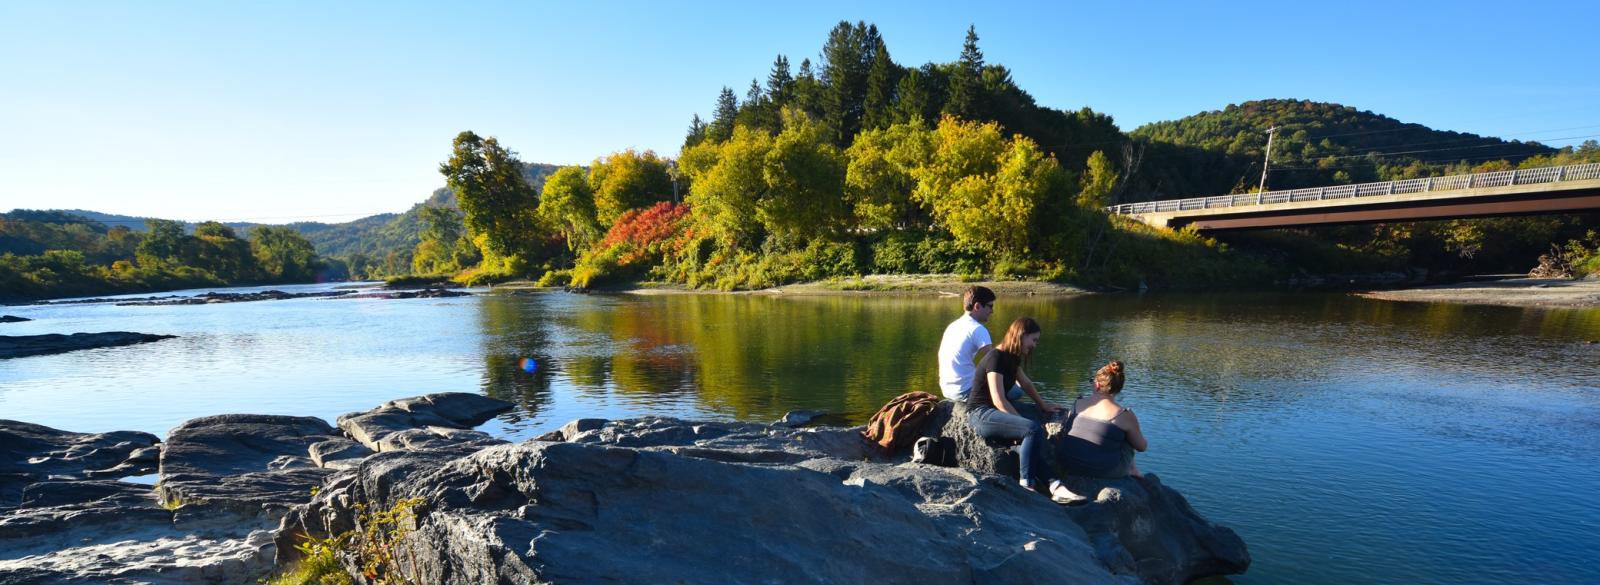 Vermont Law School students sit on a rock on the banks of the White River in South Royalton.